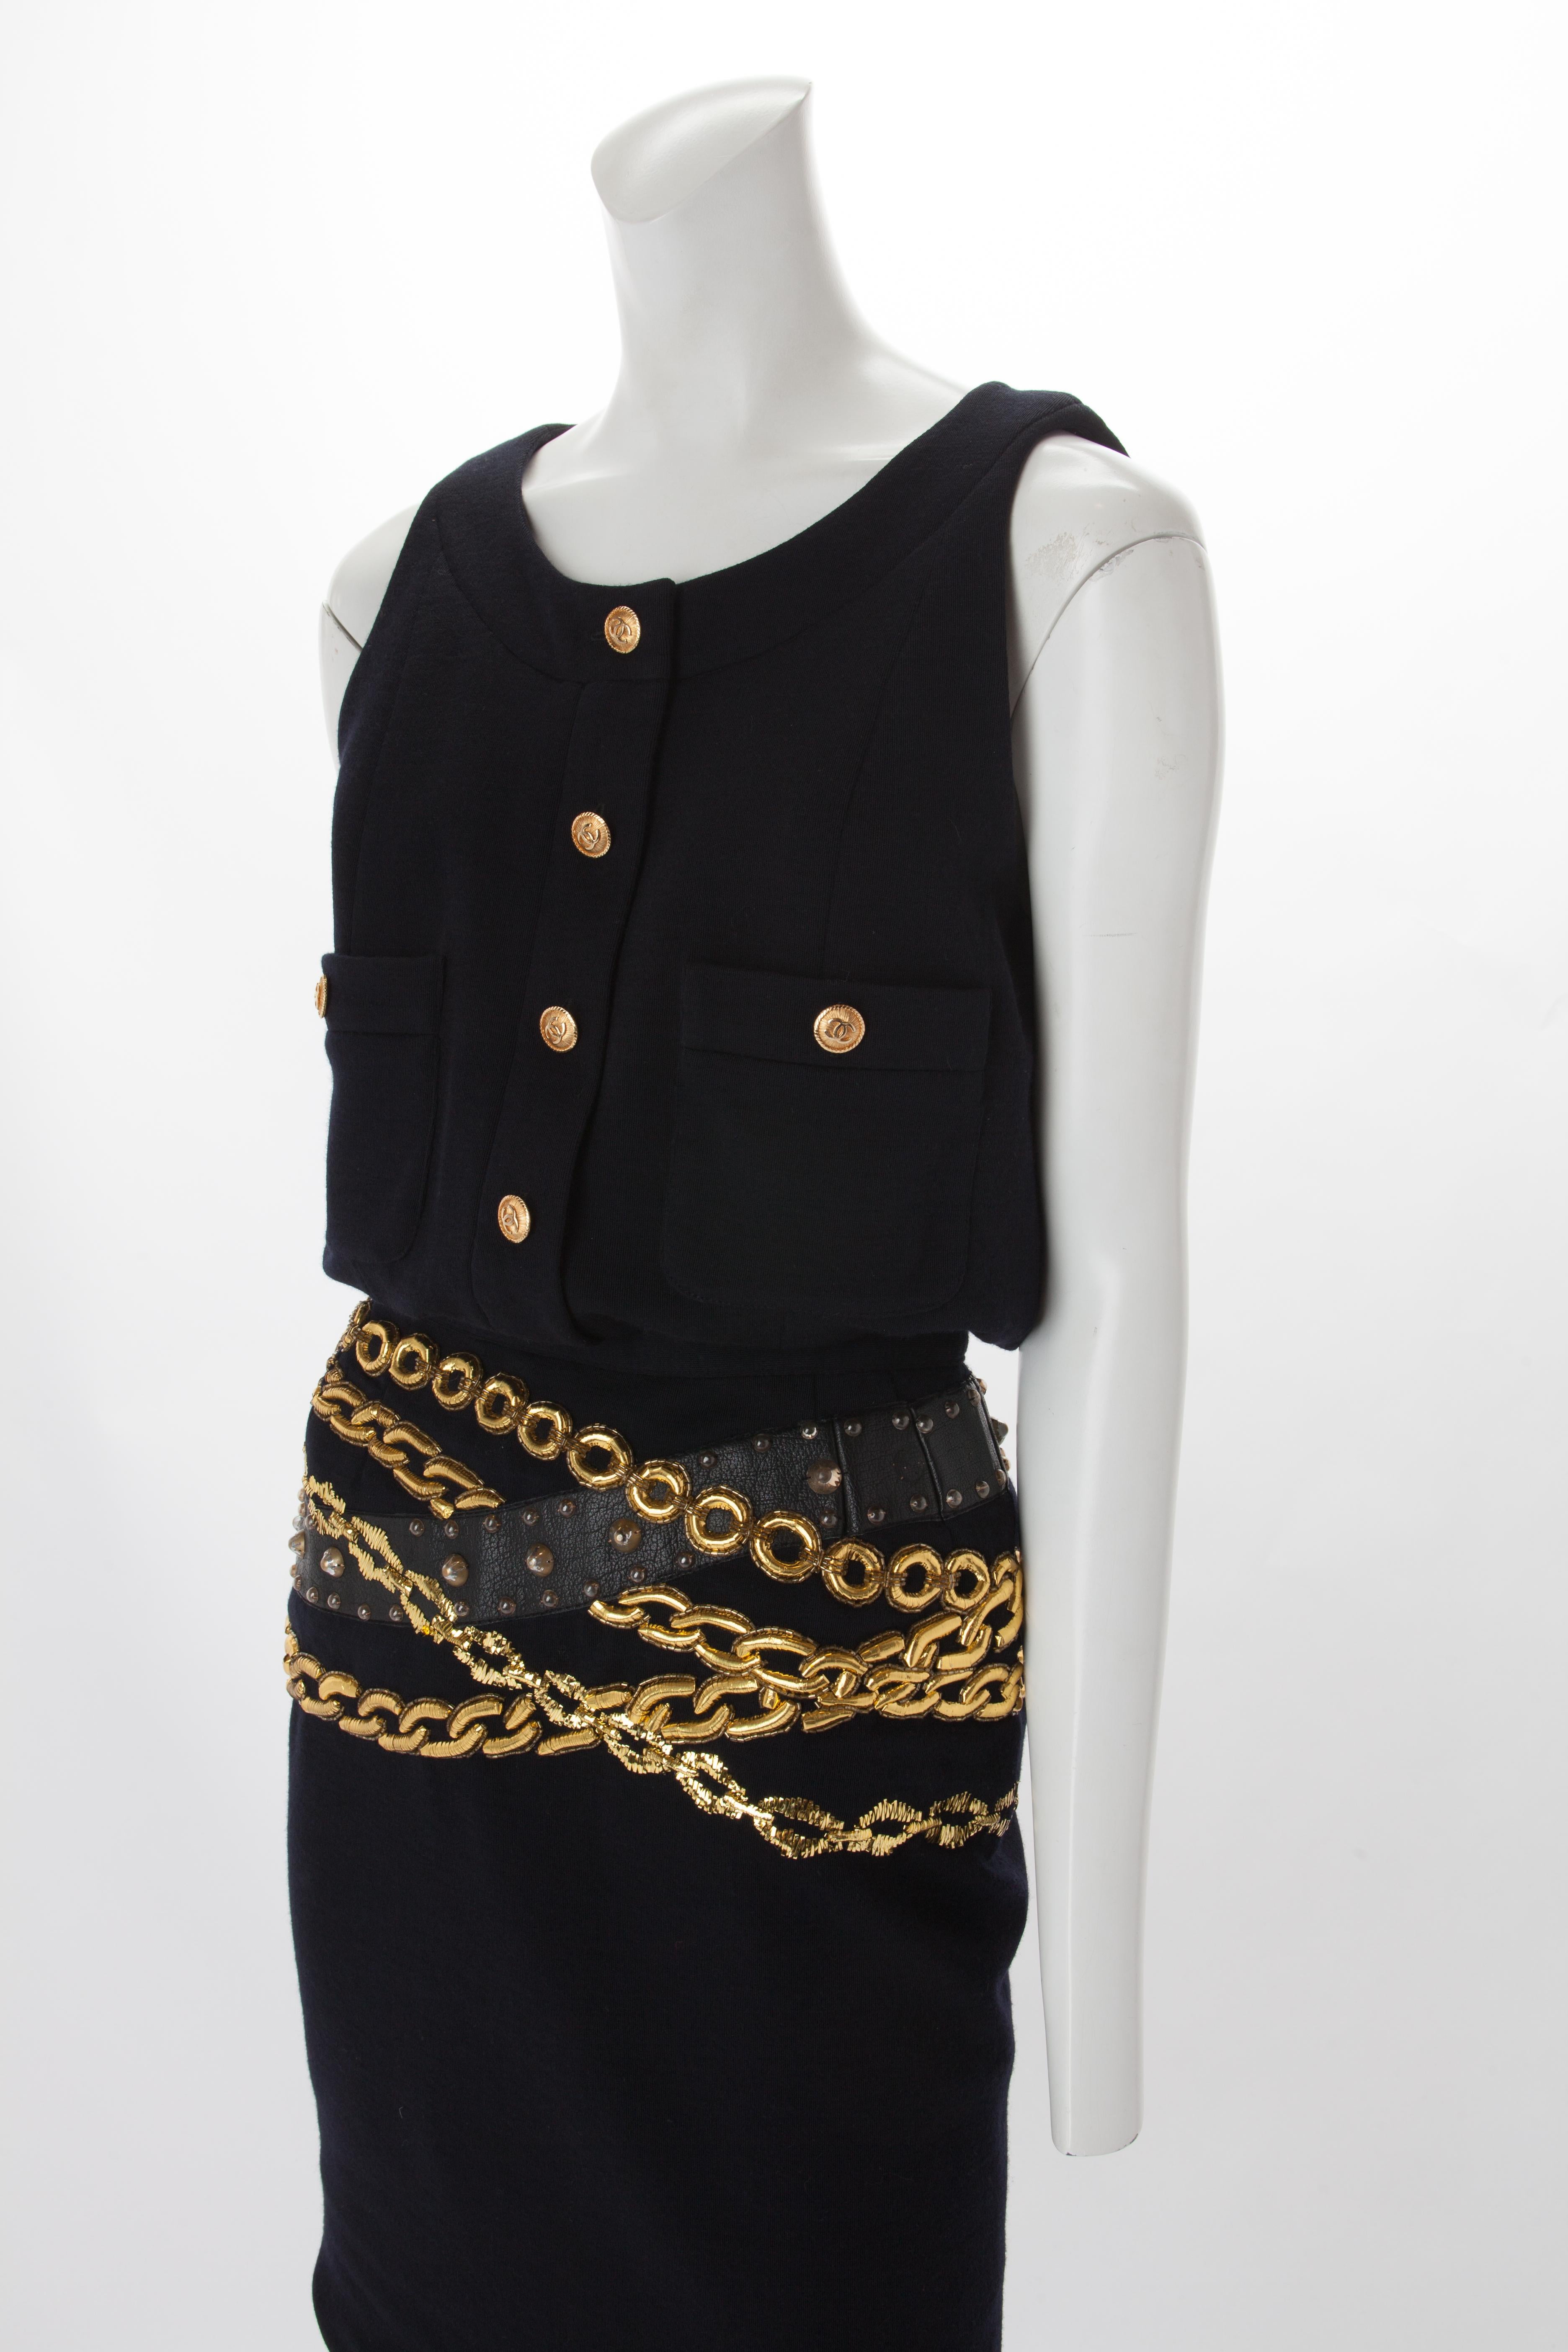 chanel black dress with chains